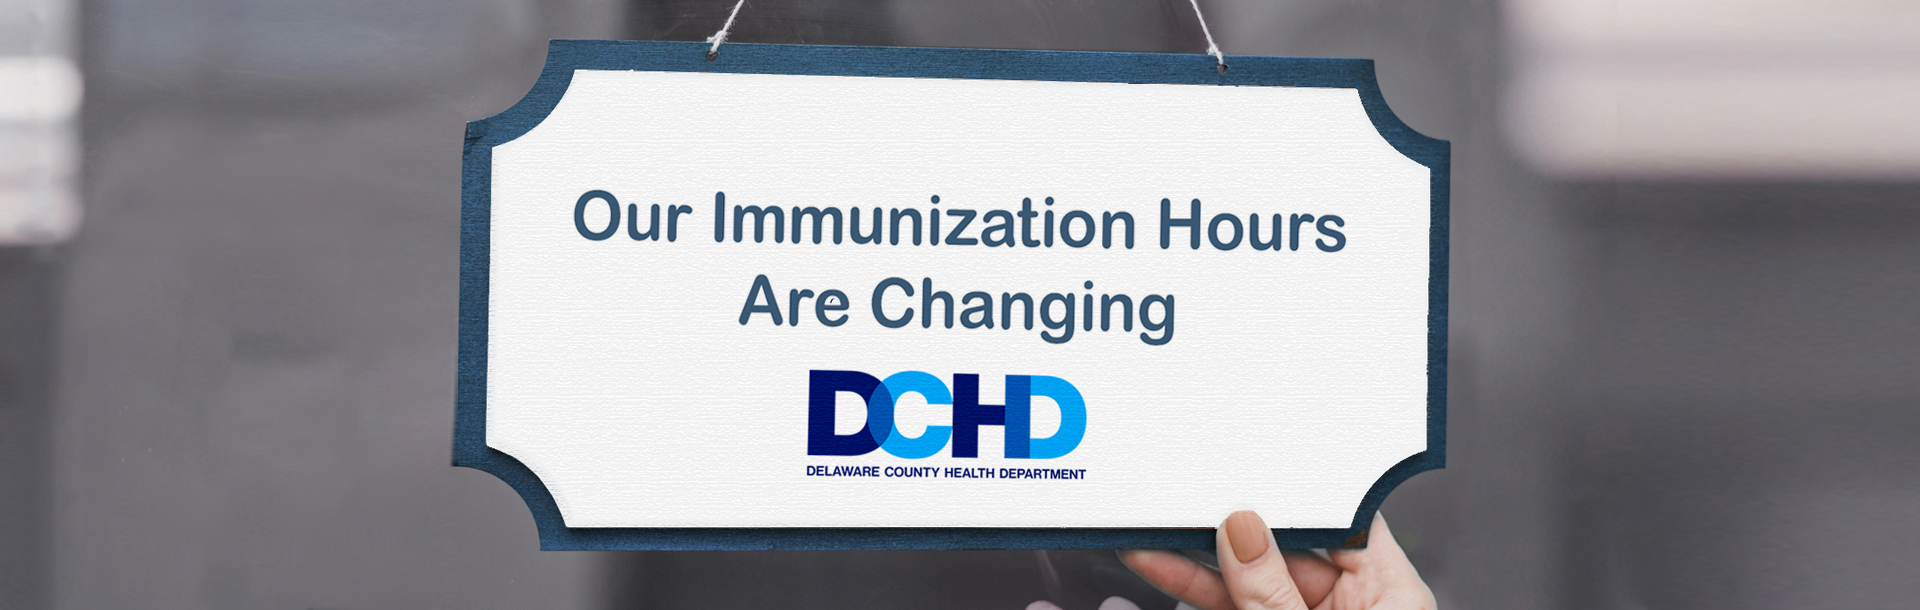 Our Immunization Hours are Changing